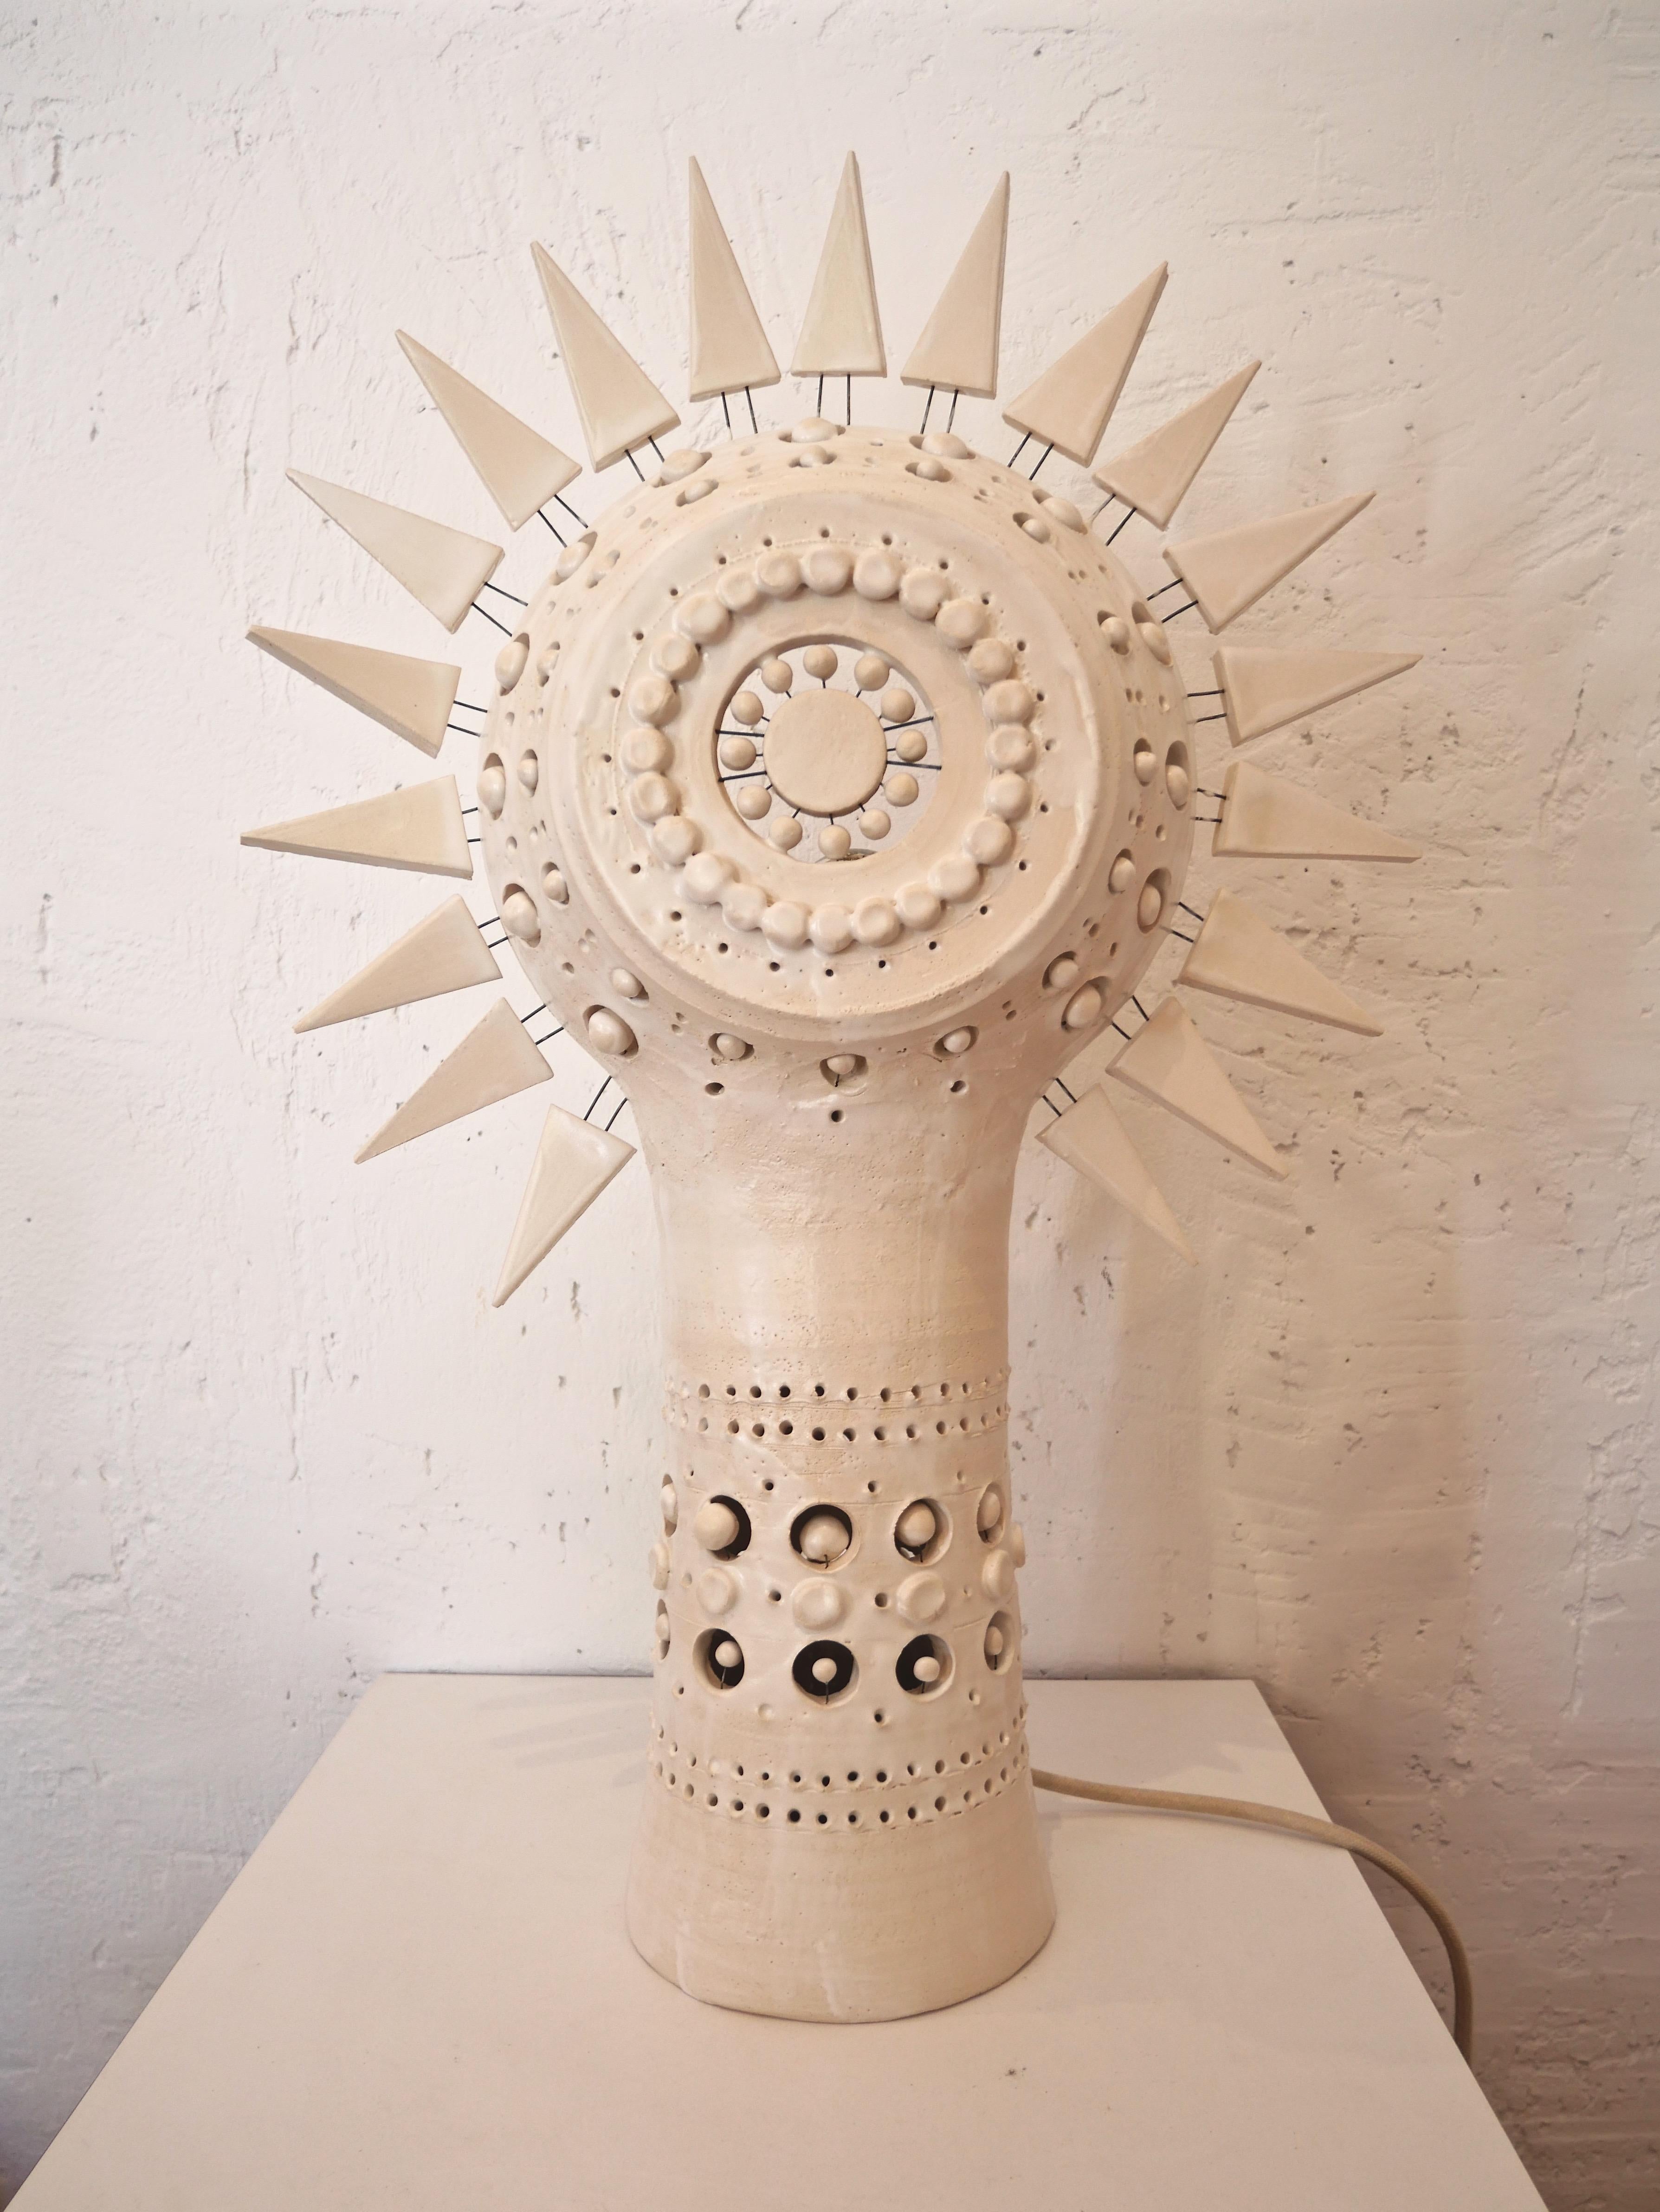 Contemporary Georges Pelletier Sun Table Lamp in White Enameled Ceramic, France 2020